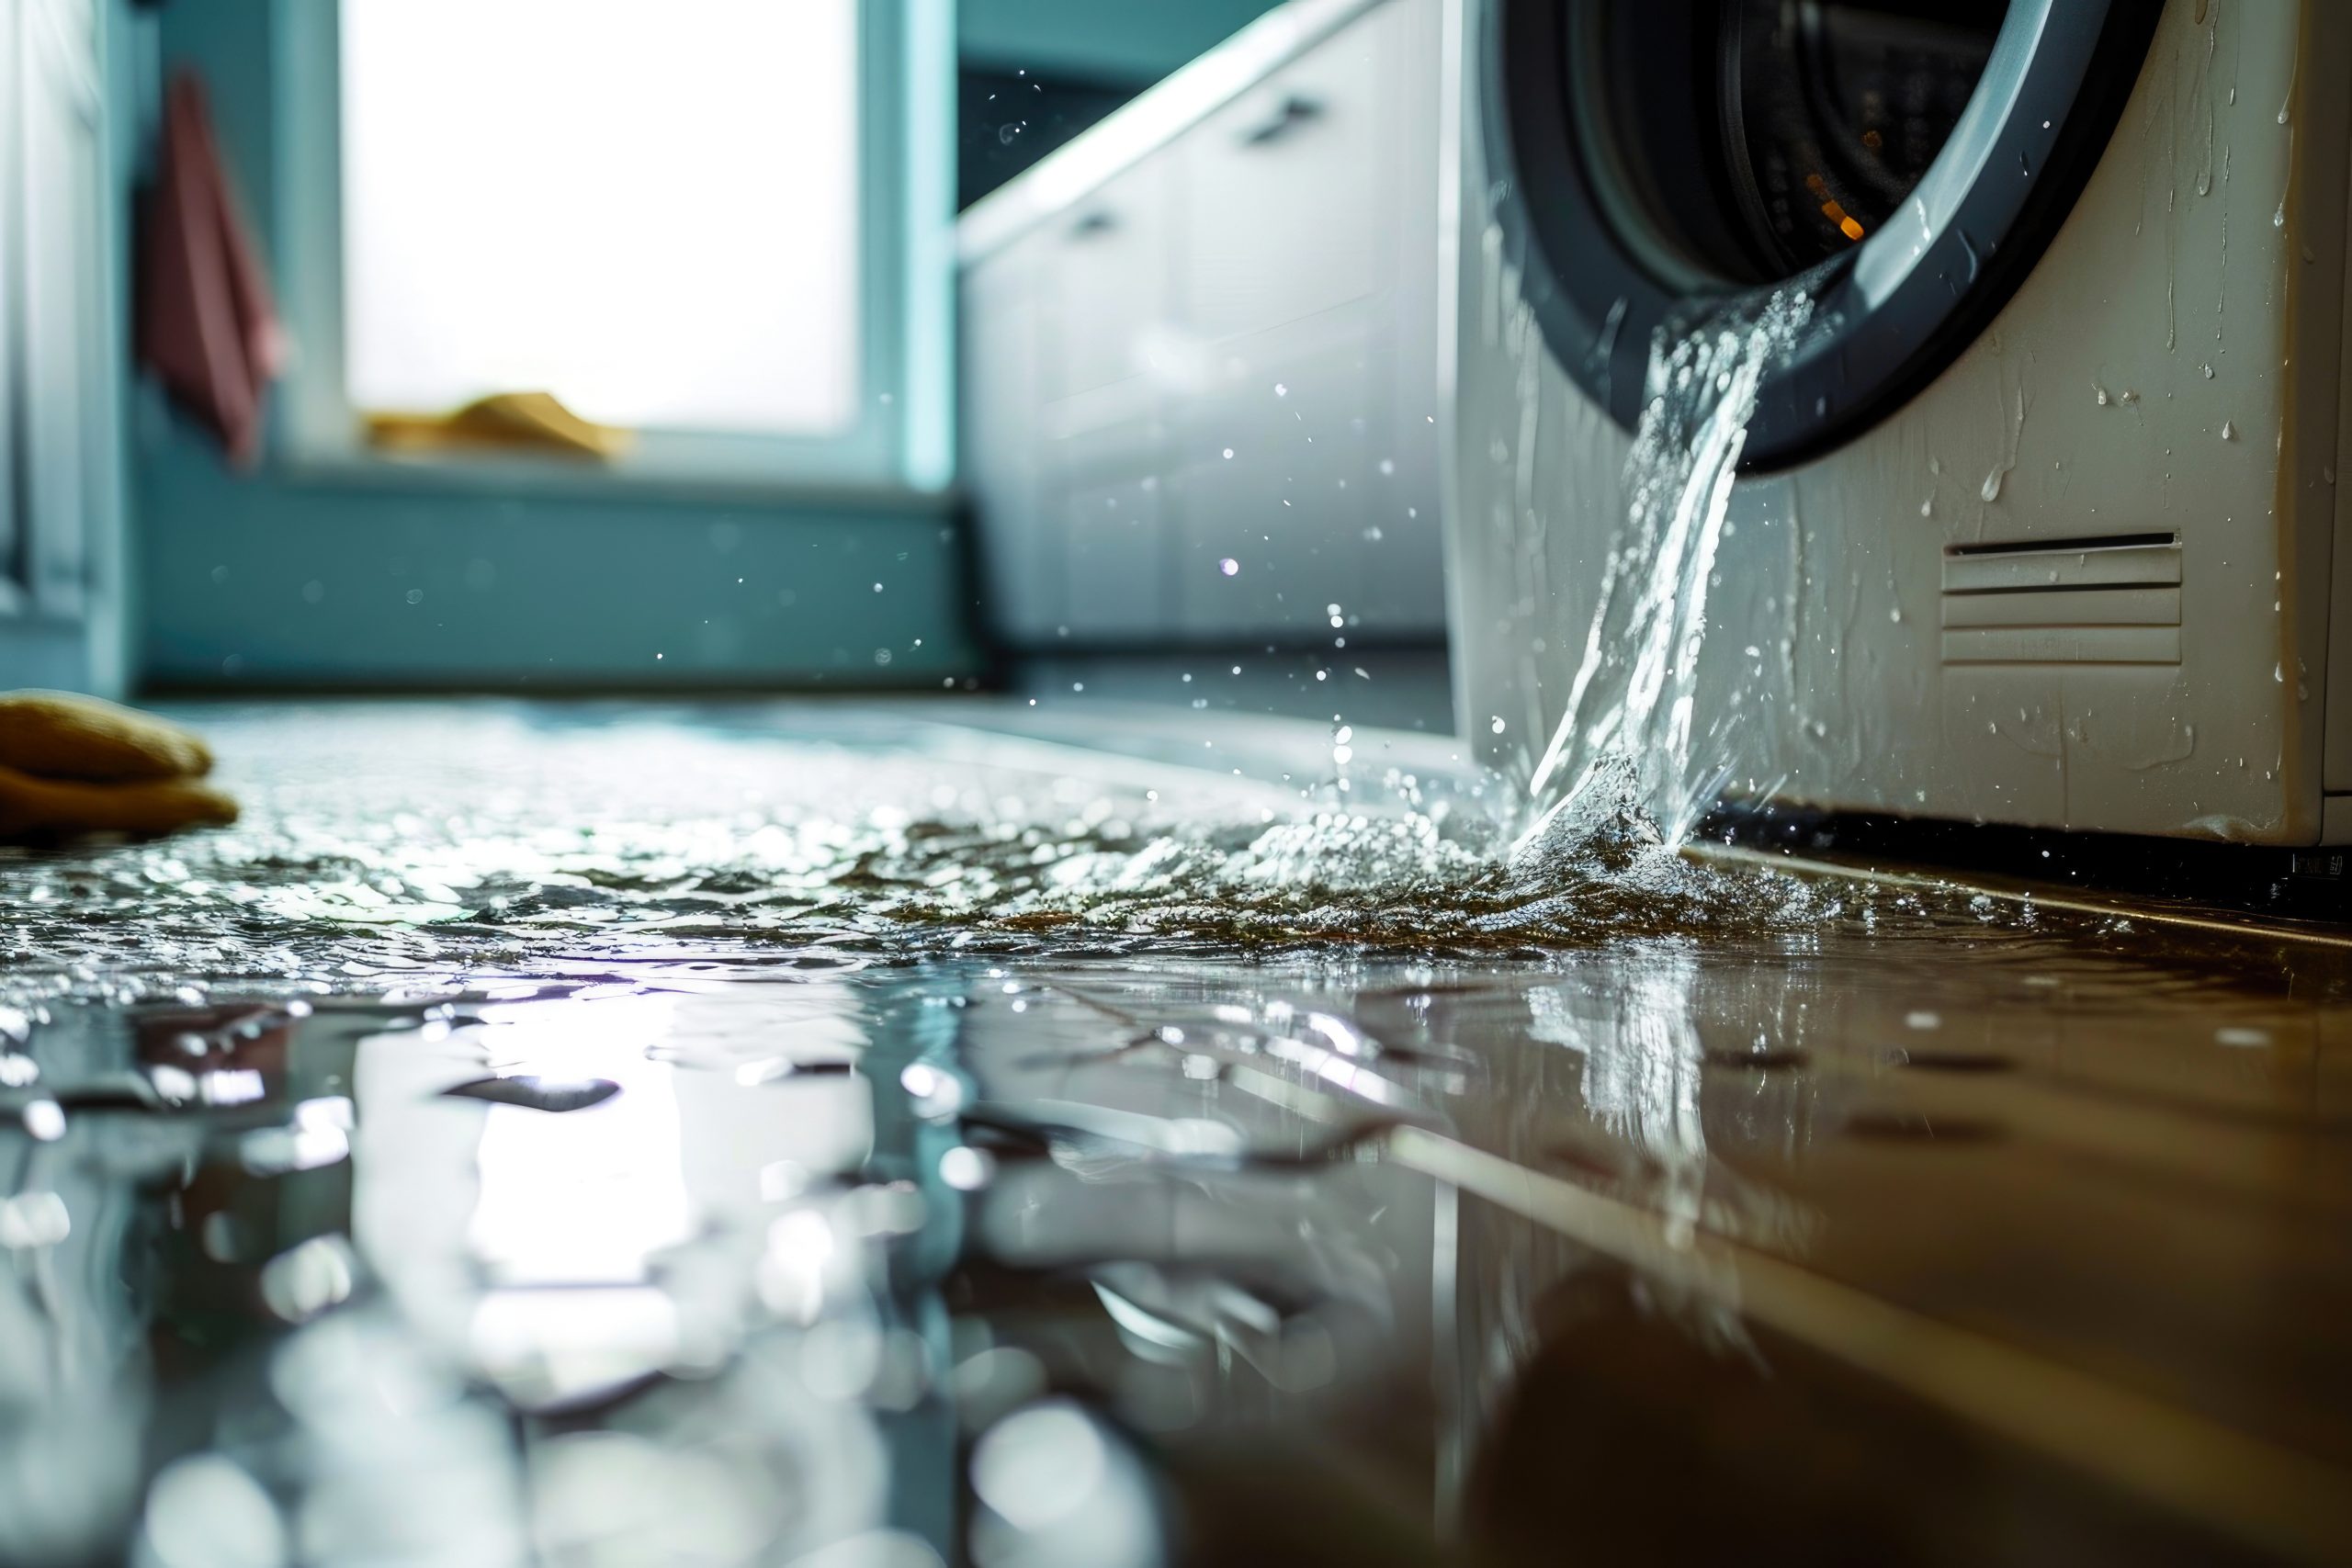 Comprehensive guide on identifying, preventing, and addressing water damage caused by dishwasher floods, including tips for immediate actions, the importance of professional restoration, and steps for recovery.